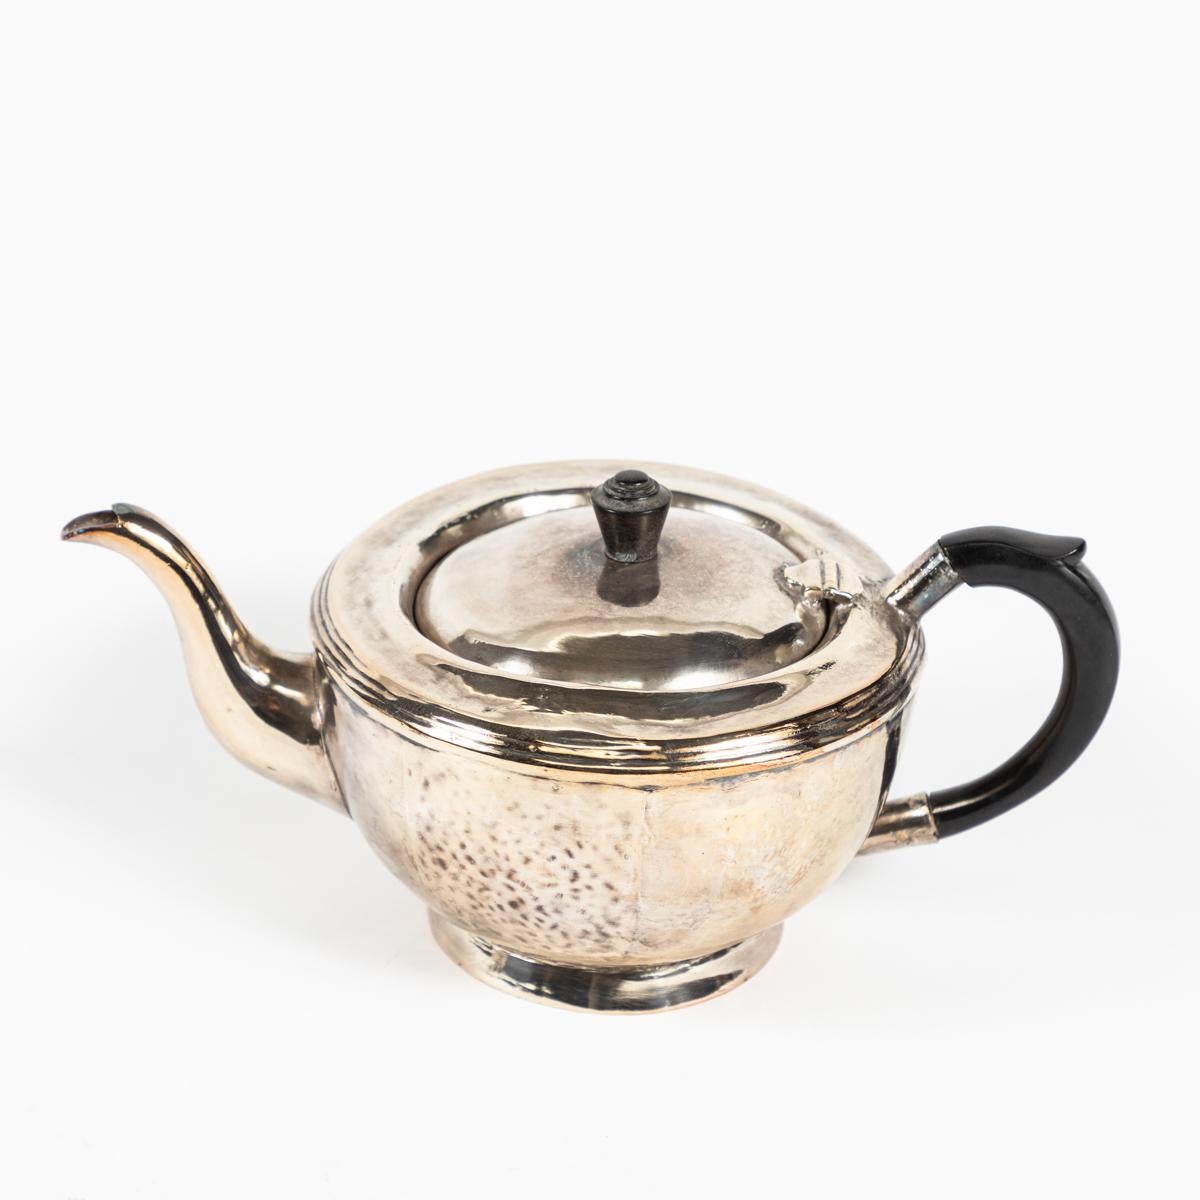 Four piece early 20th-century American hotel silver service for coffee and tea. The teapot and coffee pot feature proto-Modernist carved ebonized handles. The sugar pot and creamer feature simple lines and classic beveling. Elegant and thoughtful in